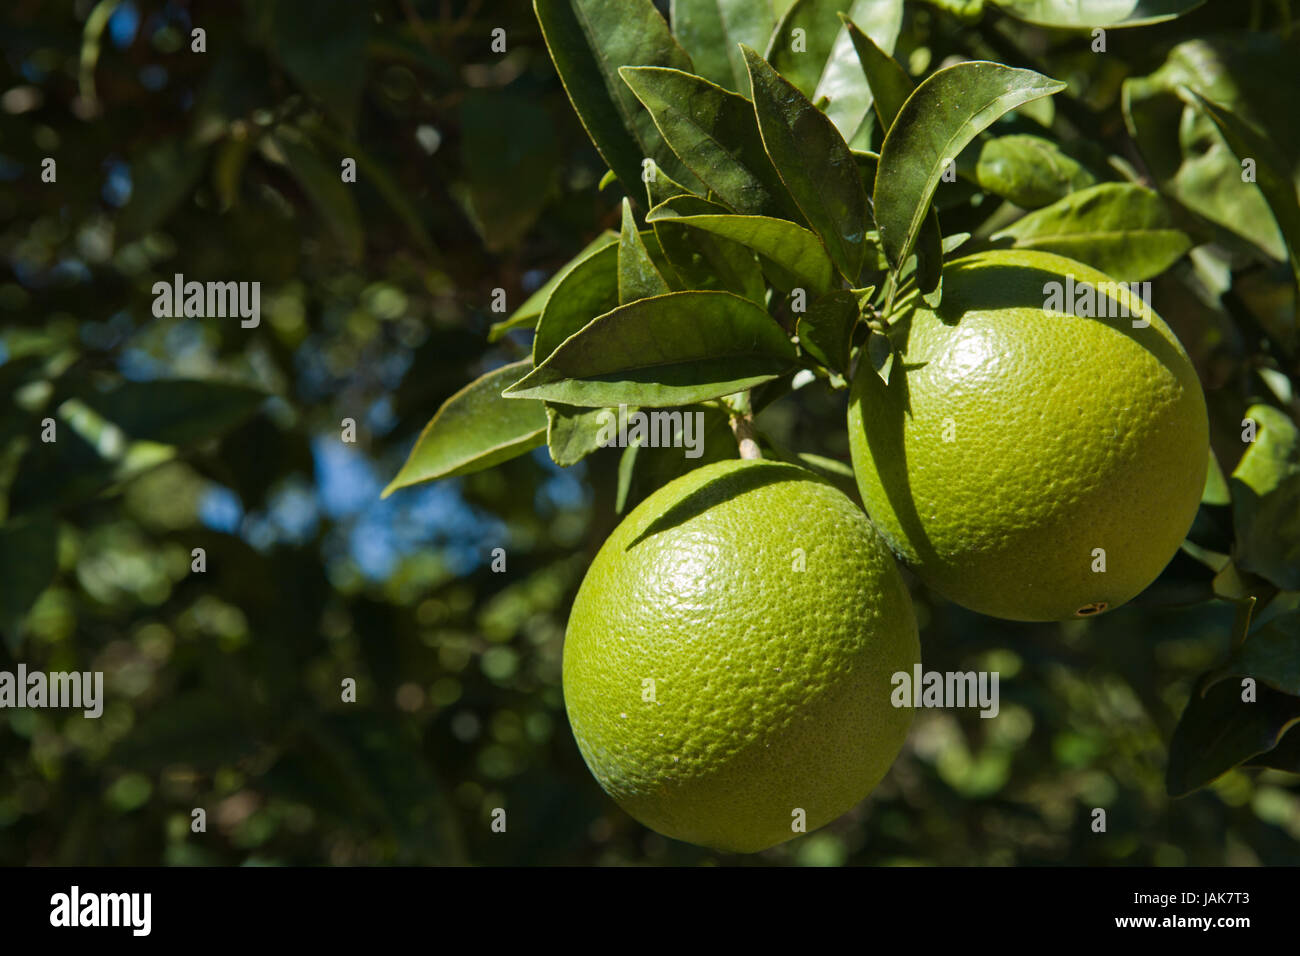 Green leaves and non mature oranges on the tree, Cordoba, Spain Stock Photo